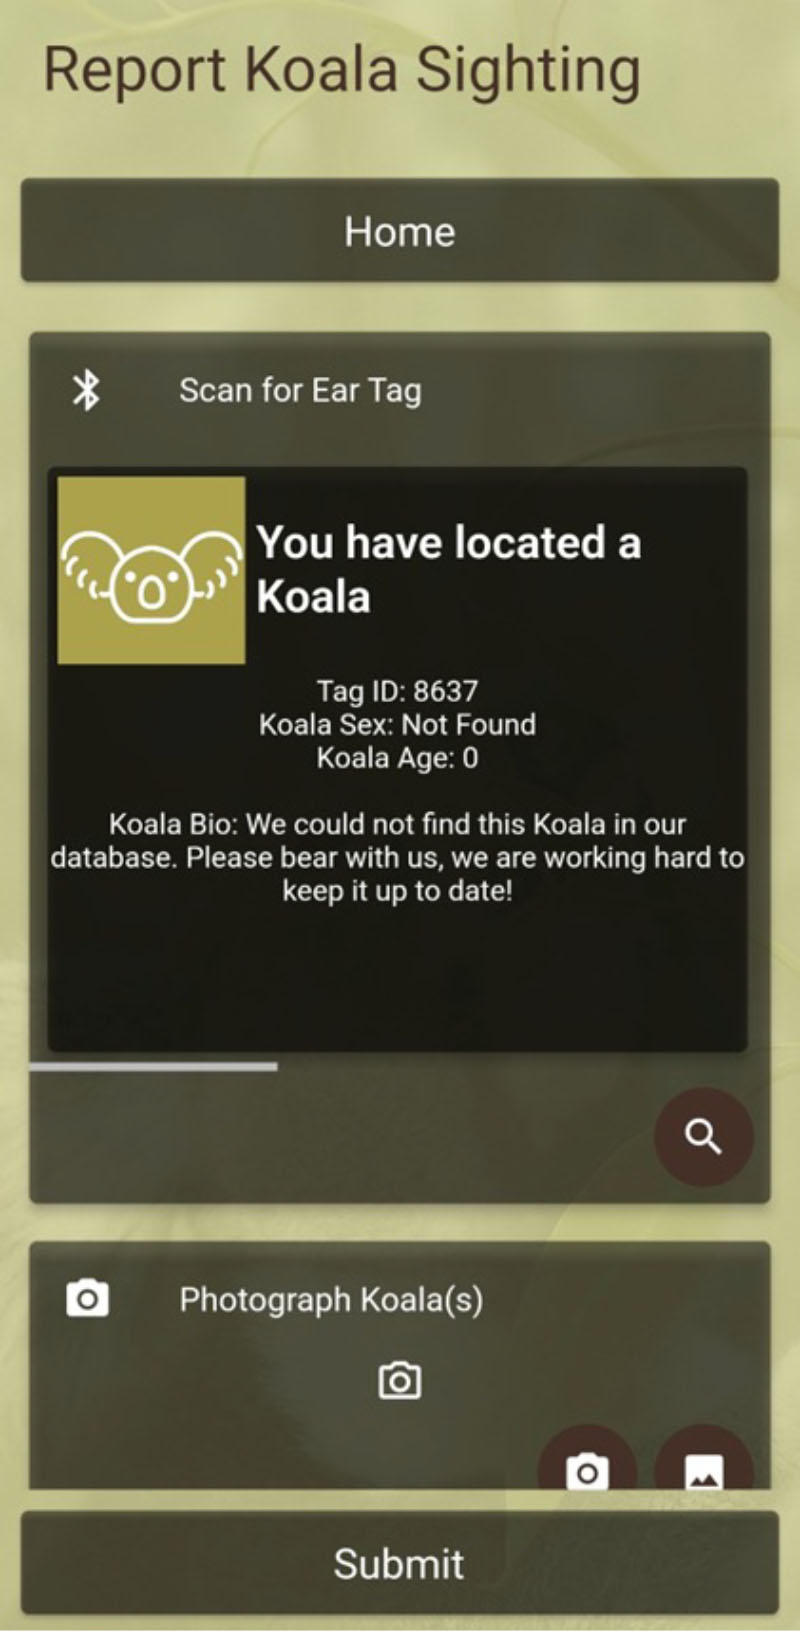 A screen shot of an app showing data for a sighted koala